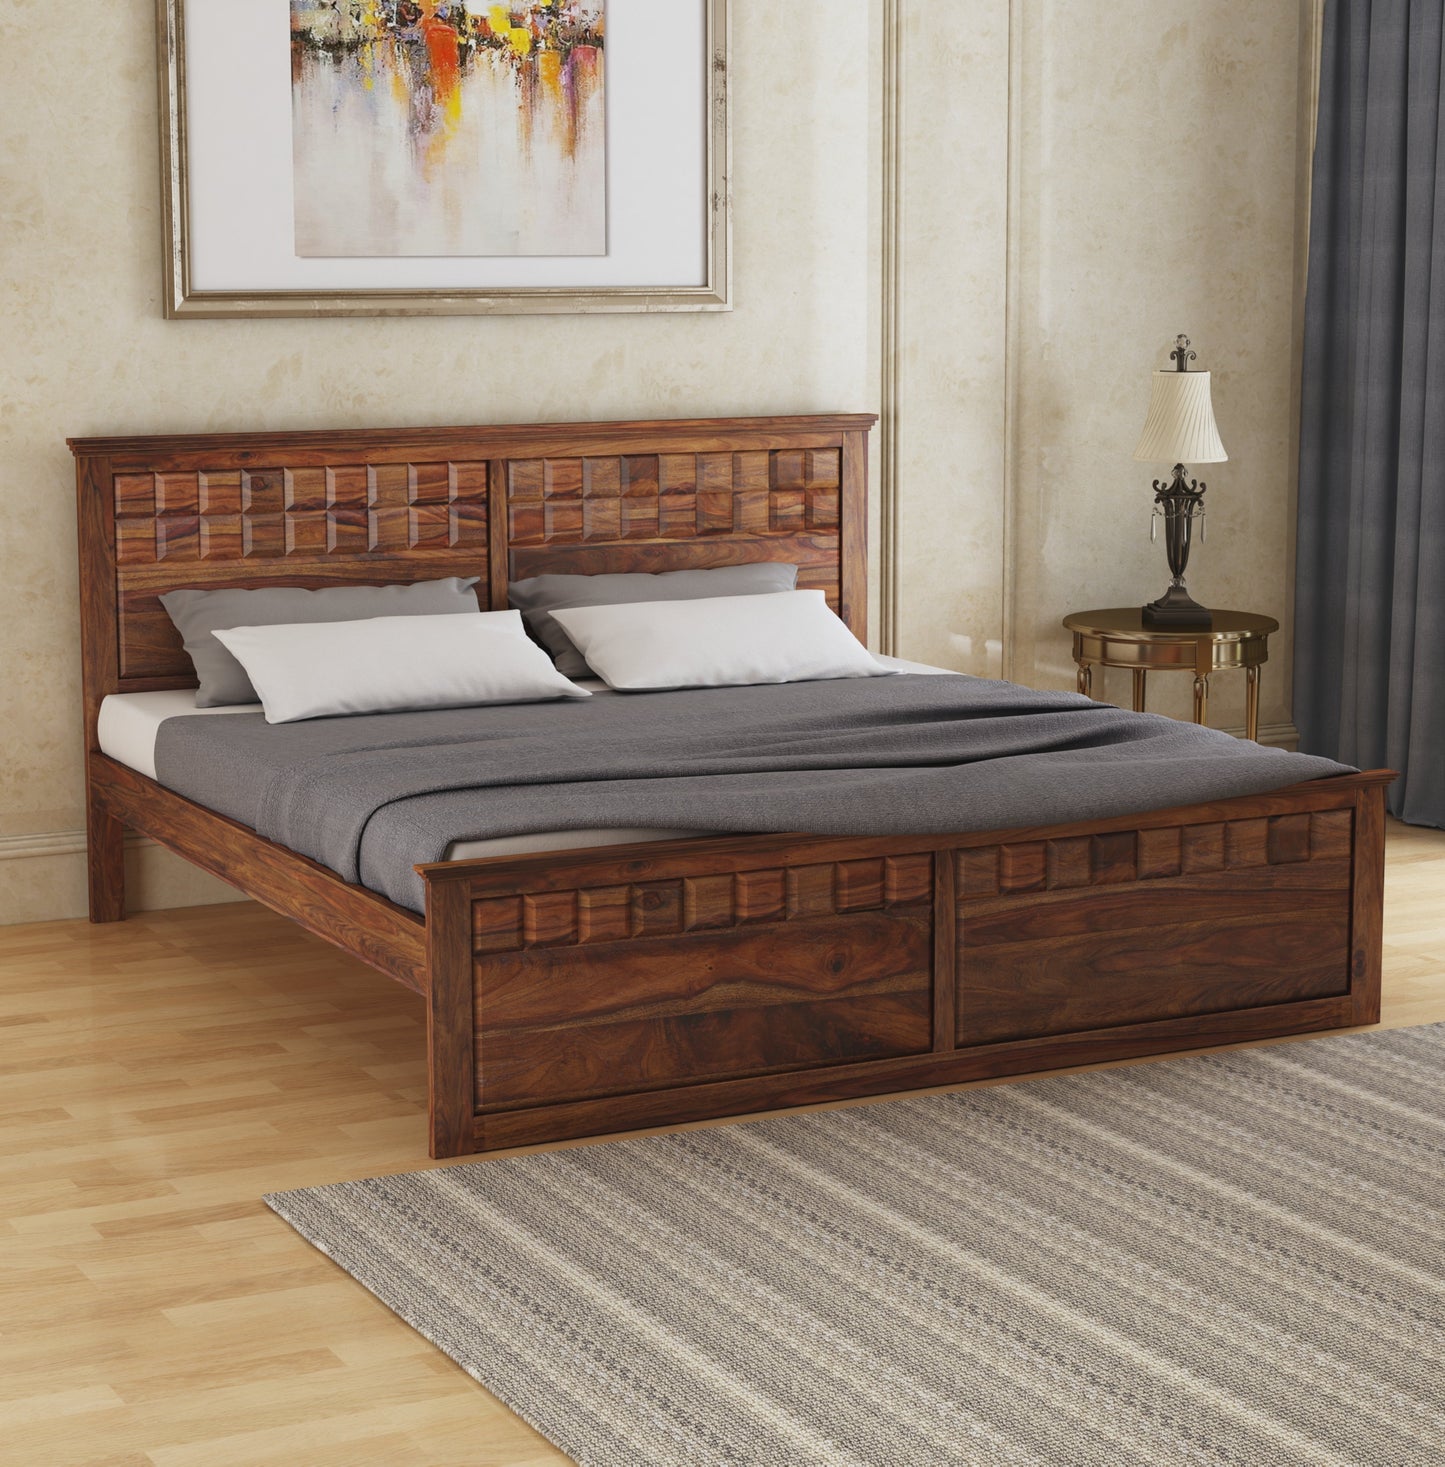 Home Edge Torpedo Queen Size Bed Without Storage